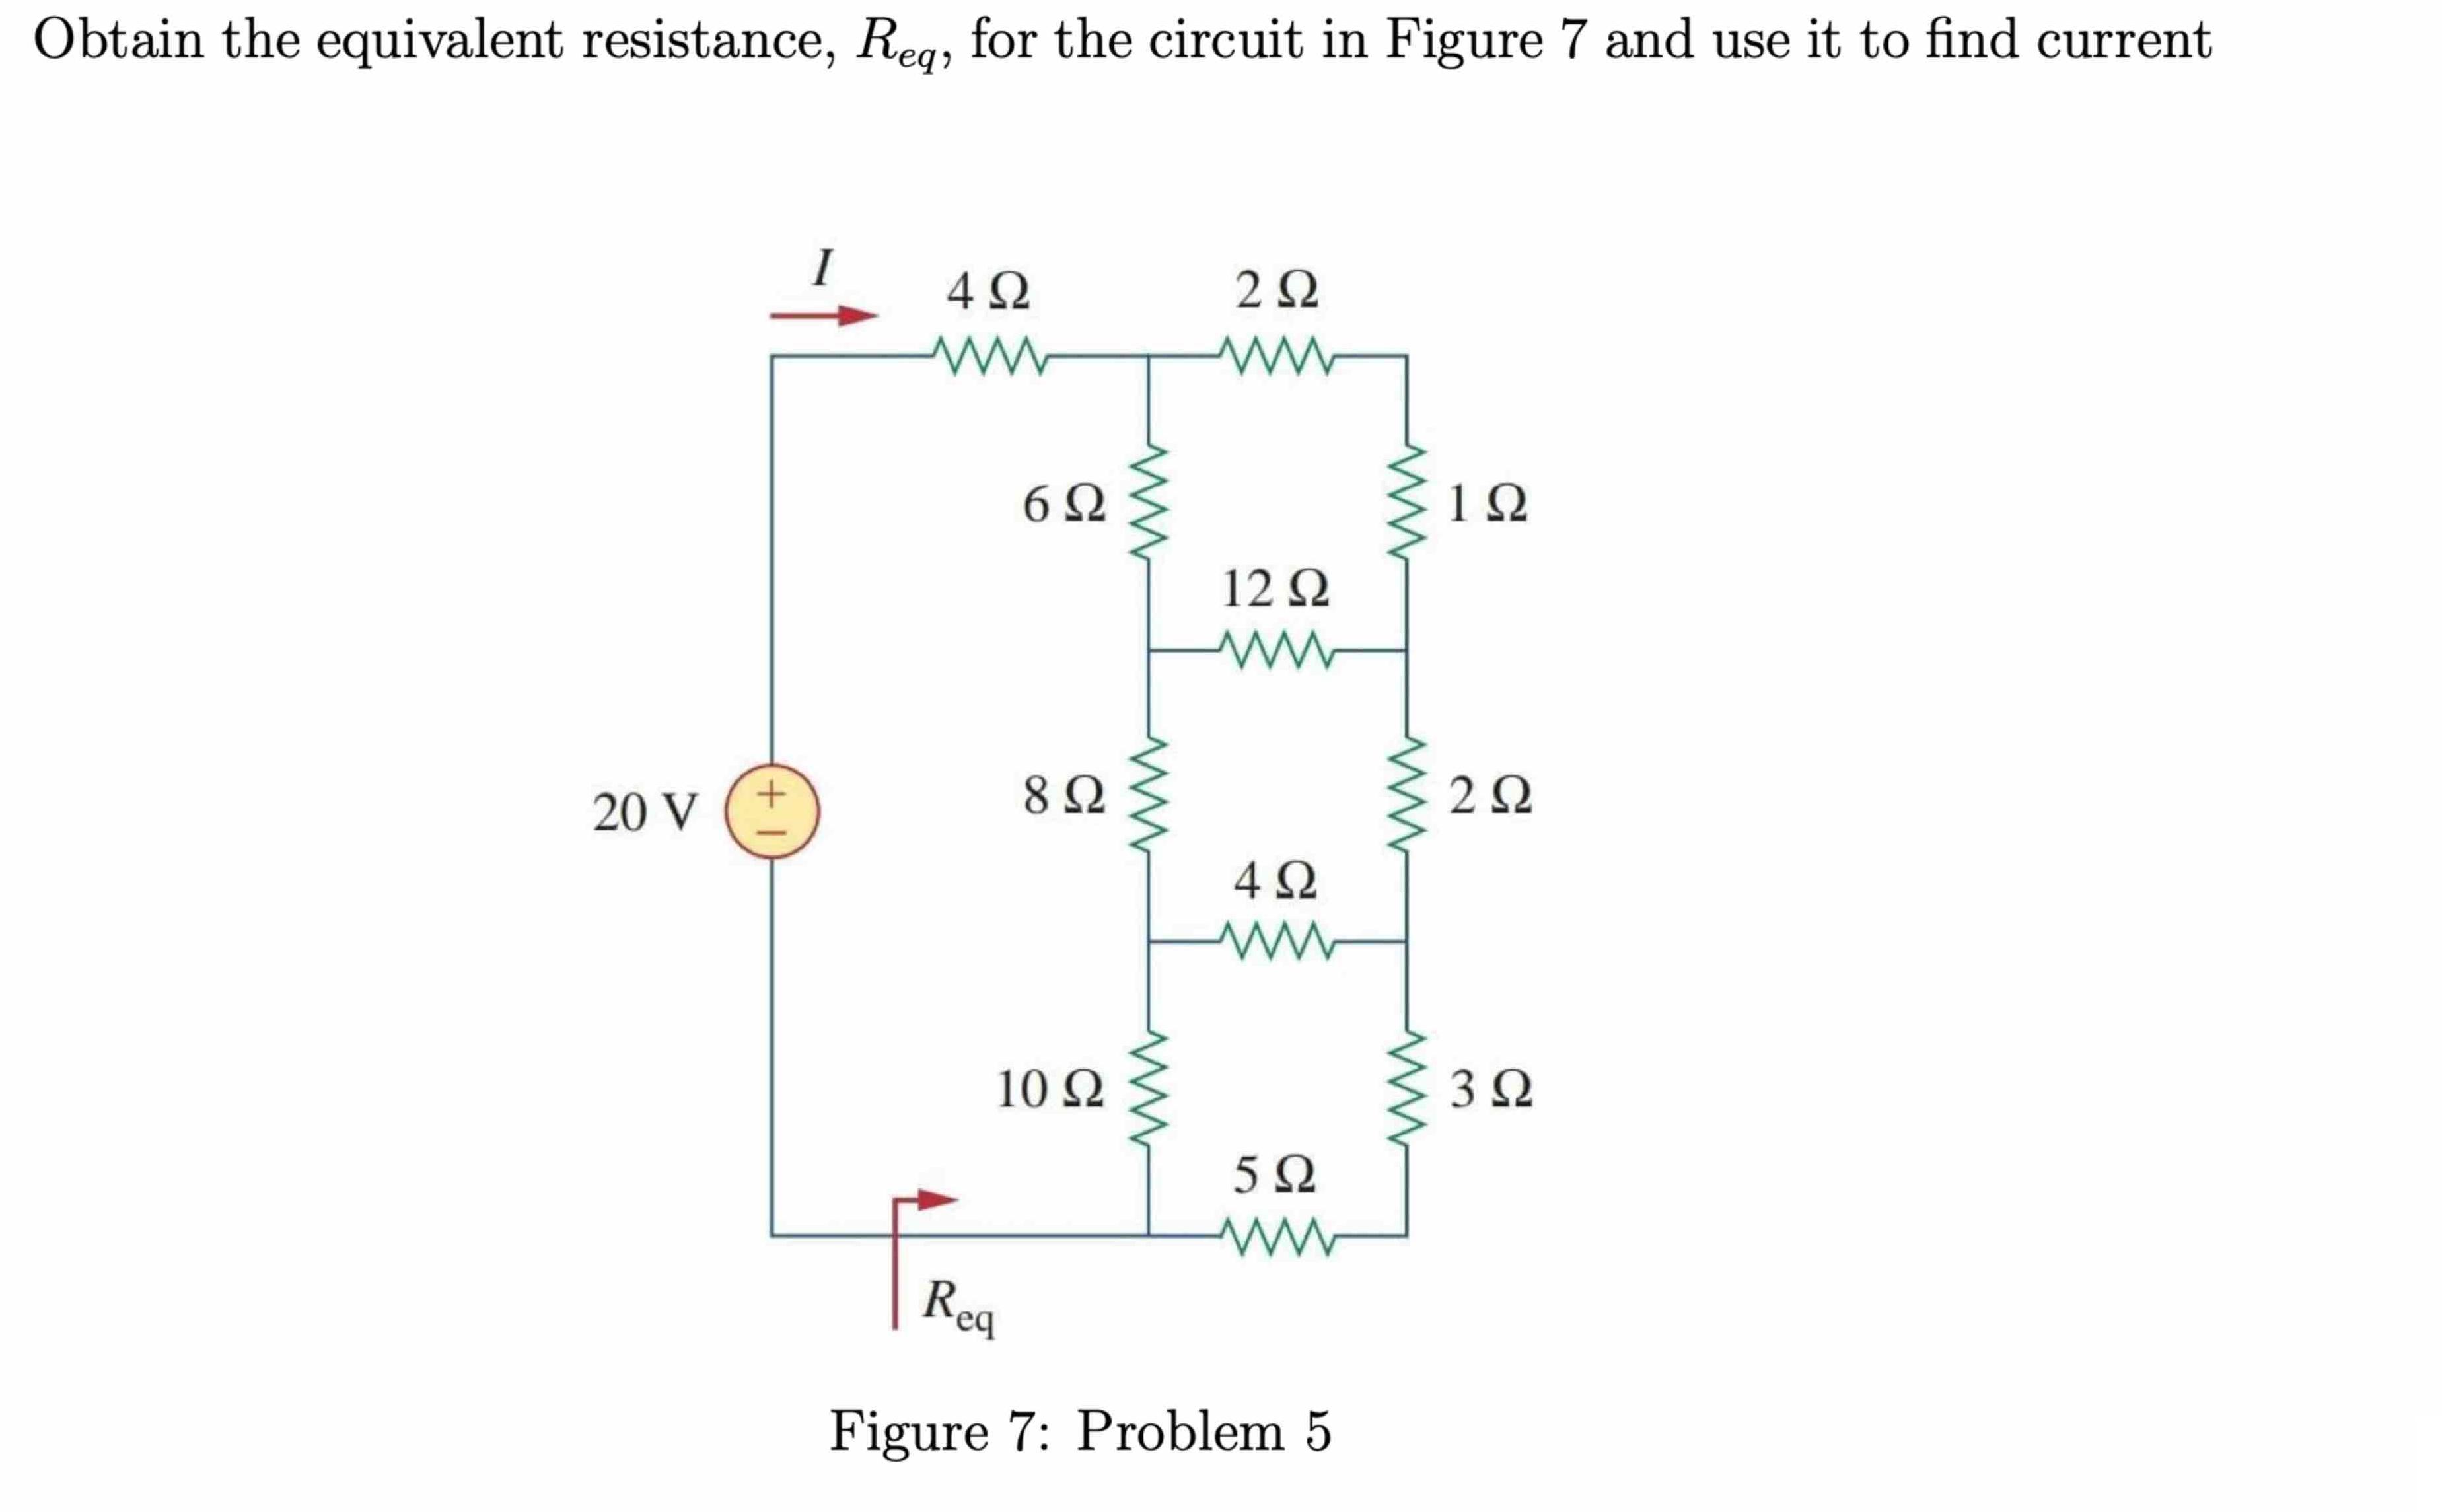 Obtain the equivalent resistance, Reg, for the circuit in Figure 7 and use it to find current 20 V +1 I 4 6 8